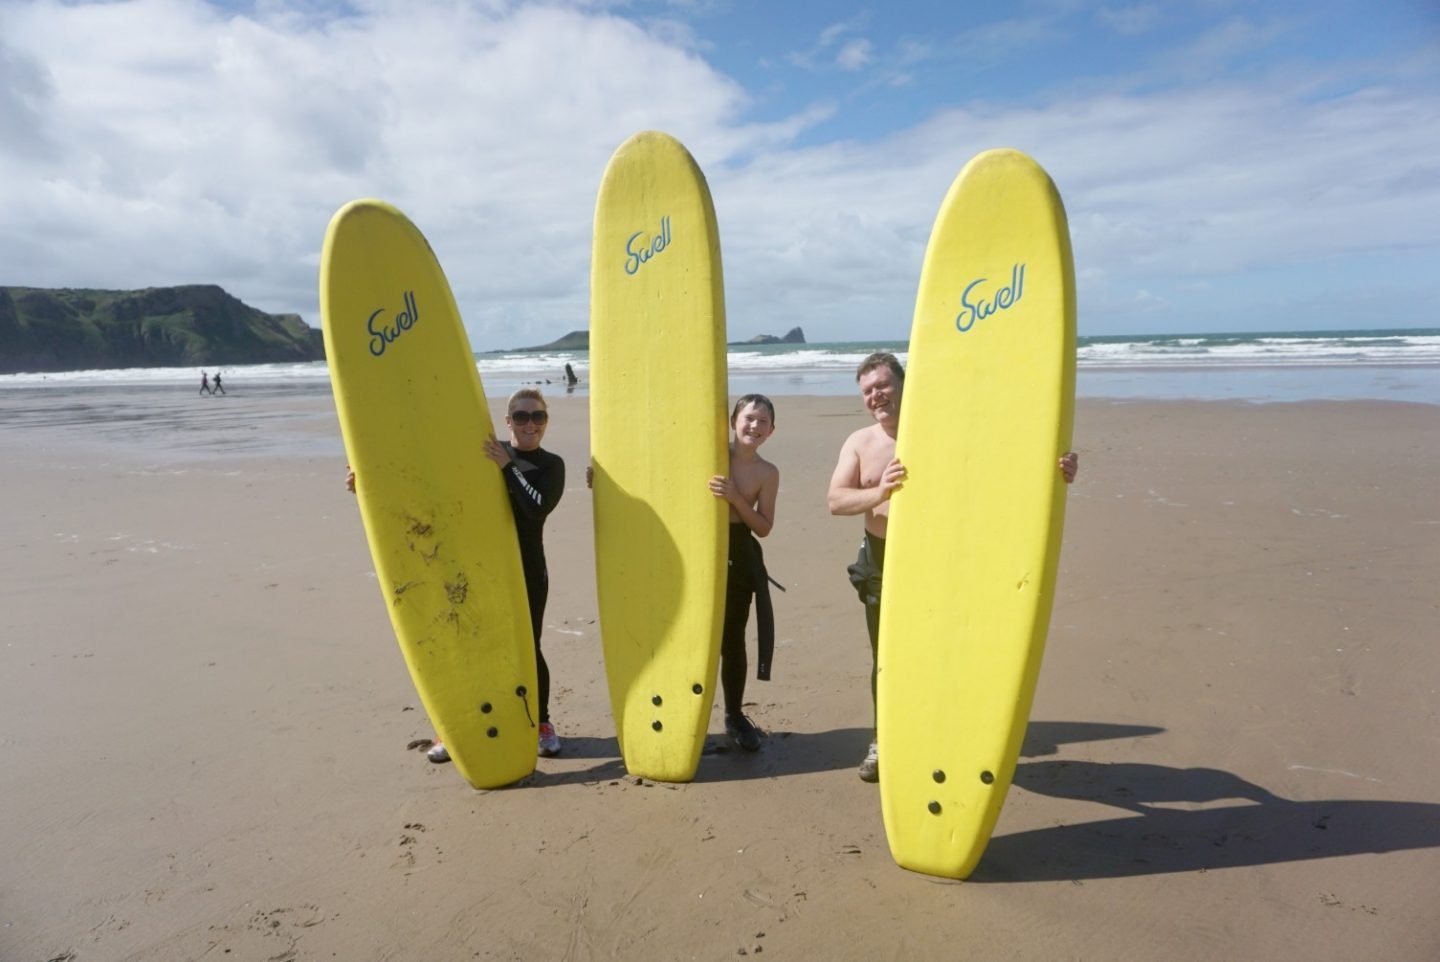 Booking surfing lessons in South Wales www.extraordinarychaos.com